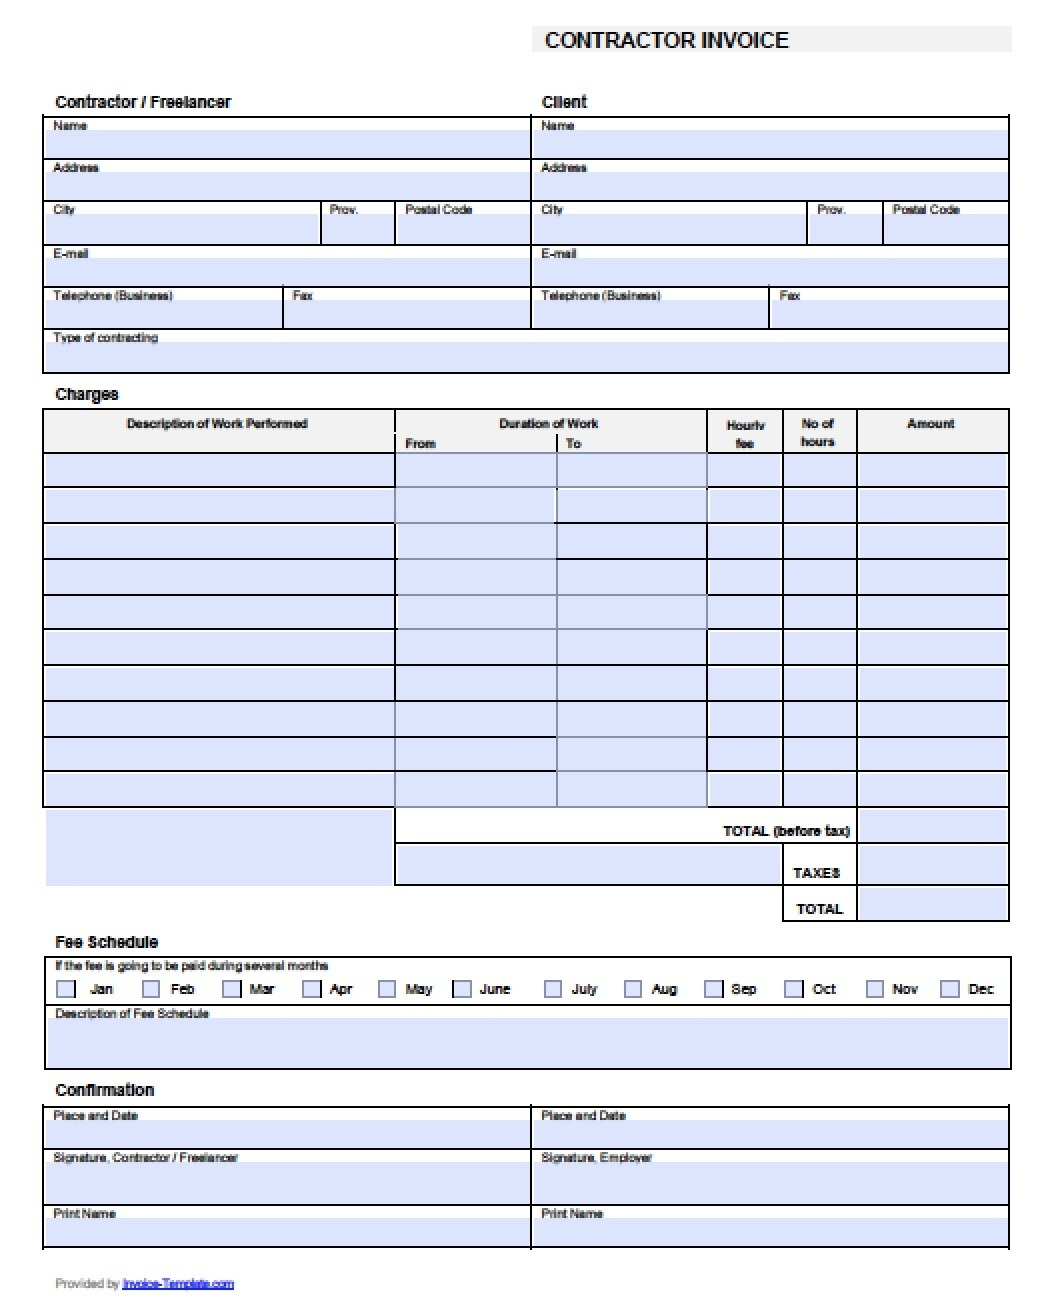 free general labor invoice template excel pdf word doc in